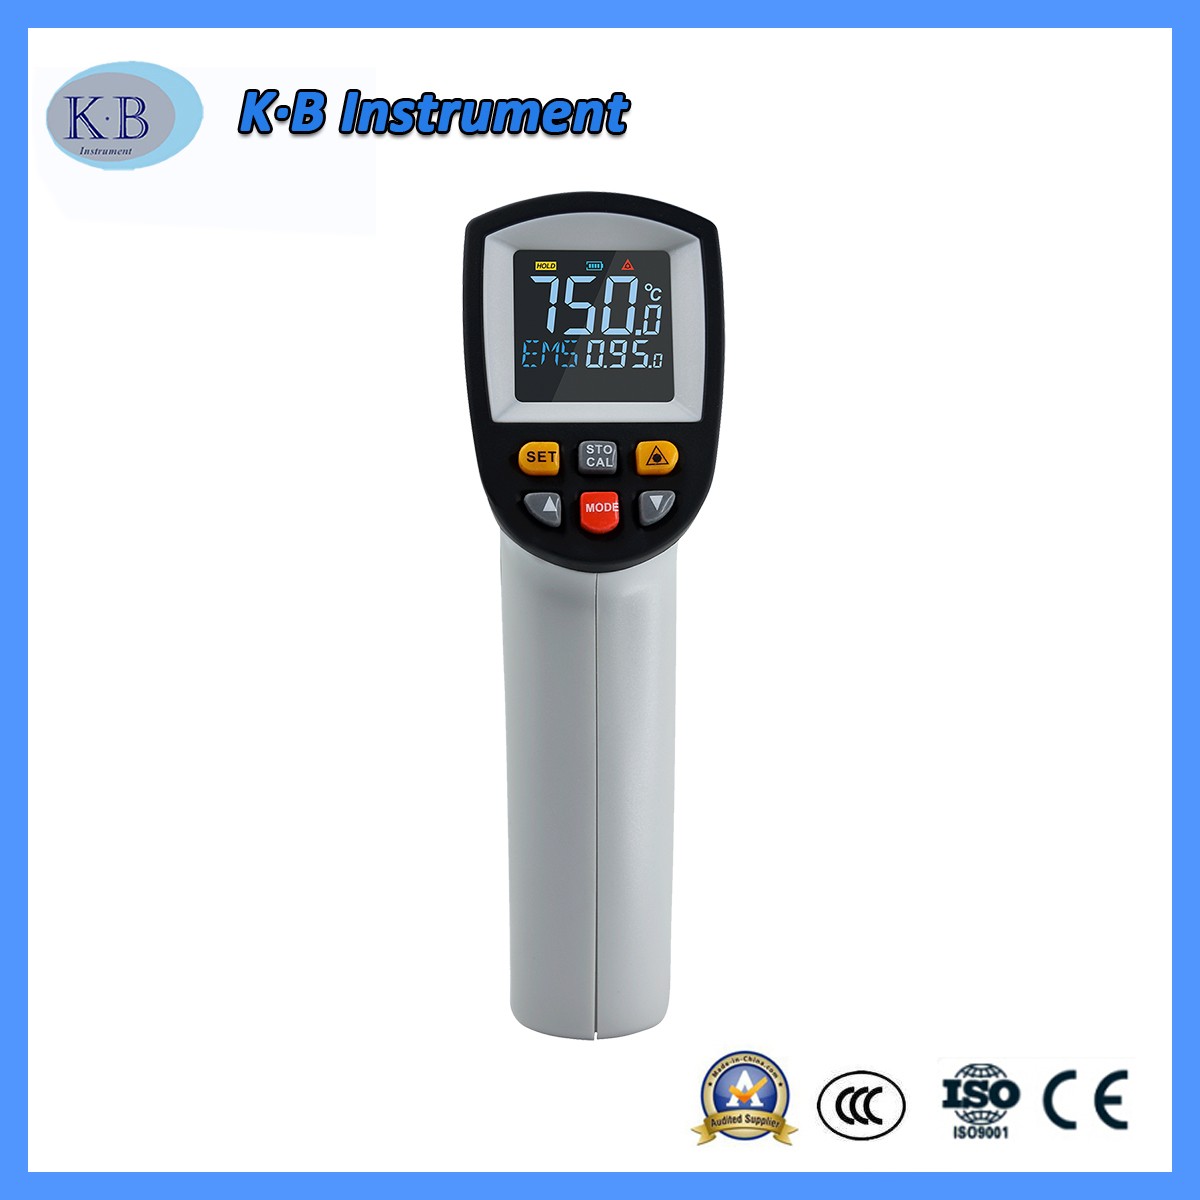 Non-contact Infrared thermometer -50+750C